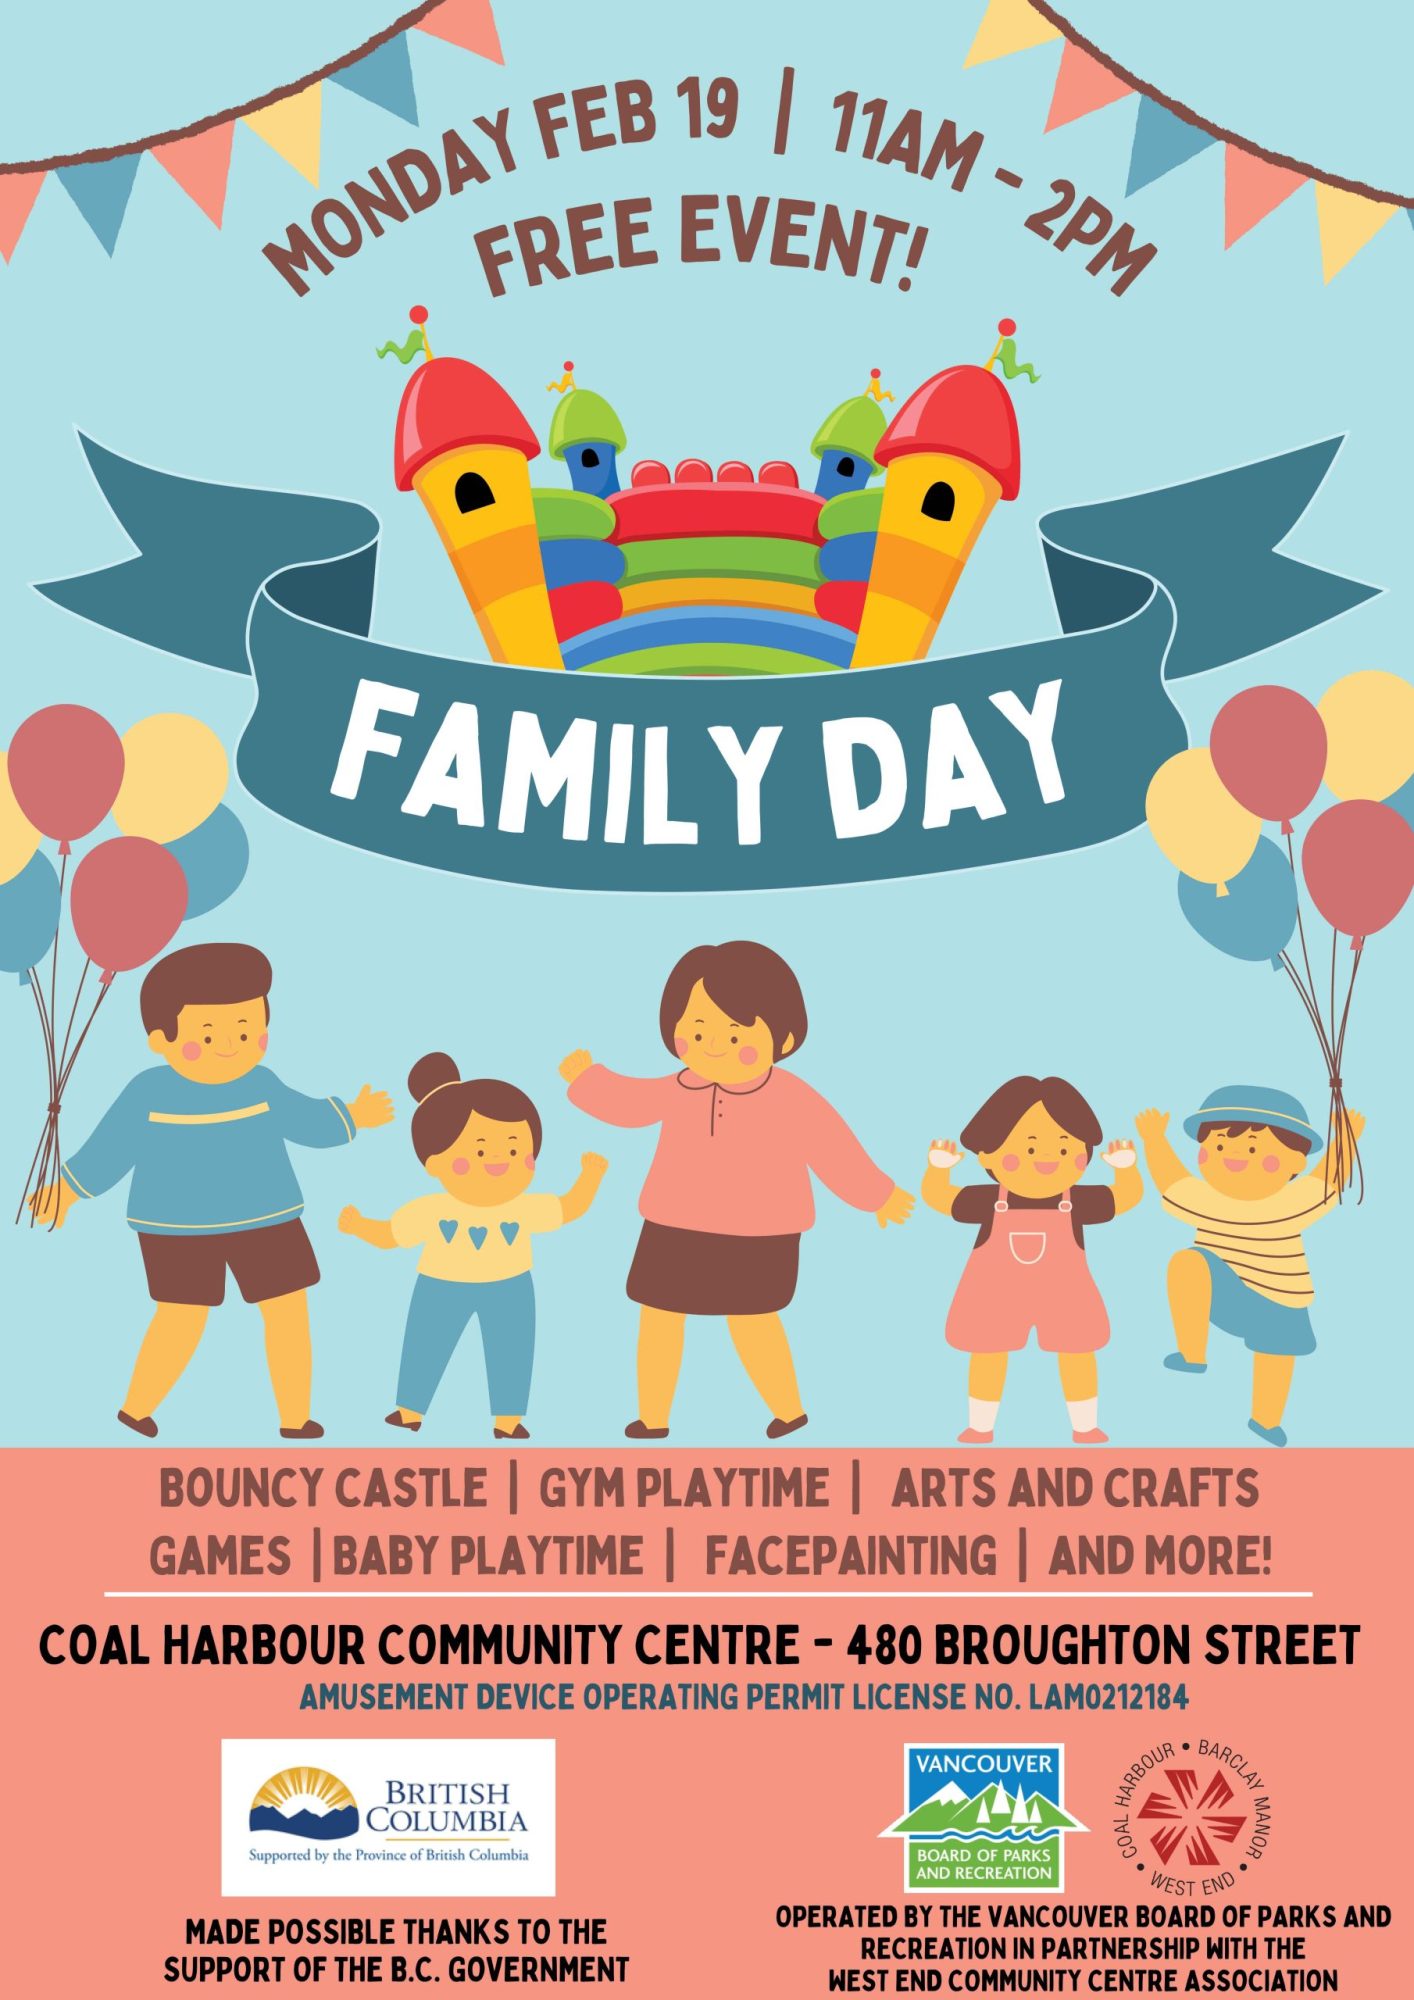 MONDAY FEB 19 | 11AM - 2PM family day Bouncy castle | Gym playtime | arts and crafts | Games | Baby playtime | facepainting | and more! COAL HARBOUR COMMUNITY CENTRE - 480 BROUGHTON STREET FREE EVENT MADE POSSIBLE THANKS TO THE SUPPORT OF THE B.C. GOVERNMENT. OPERATED BY THE VANCOUVER BOARD OF PARKS AND RECREATION IN PARTNERSHIP WITH THE WEST END COMMUNITY CENTRE ASSOCIATION. We gratefully acknowledge the financial support of the Province of British Columbia." "The Province of British Columbia has provided West End Community Centre Association a grant in support of our free, community Family Day activity. To learn more visit: https://www2.gov.bc.ca/gov/content/governments/celebrating-british-columbia/bc-family-day"